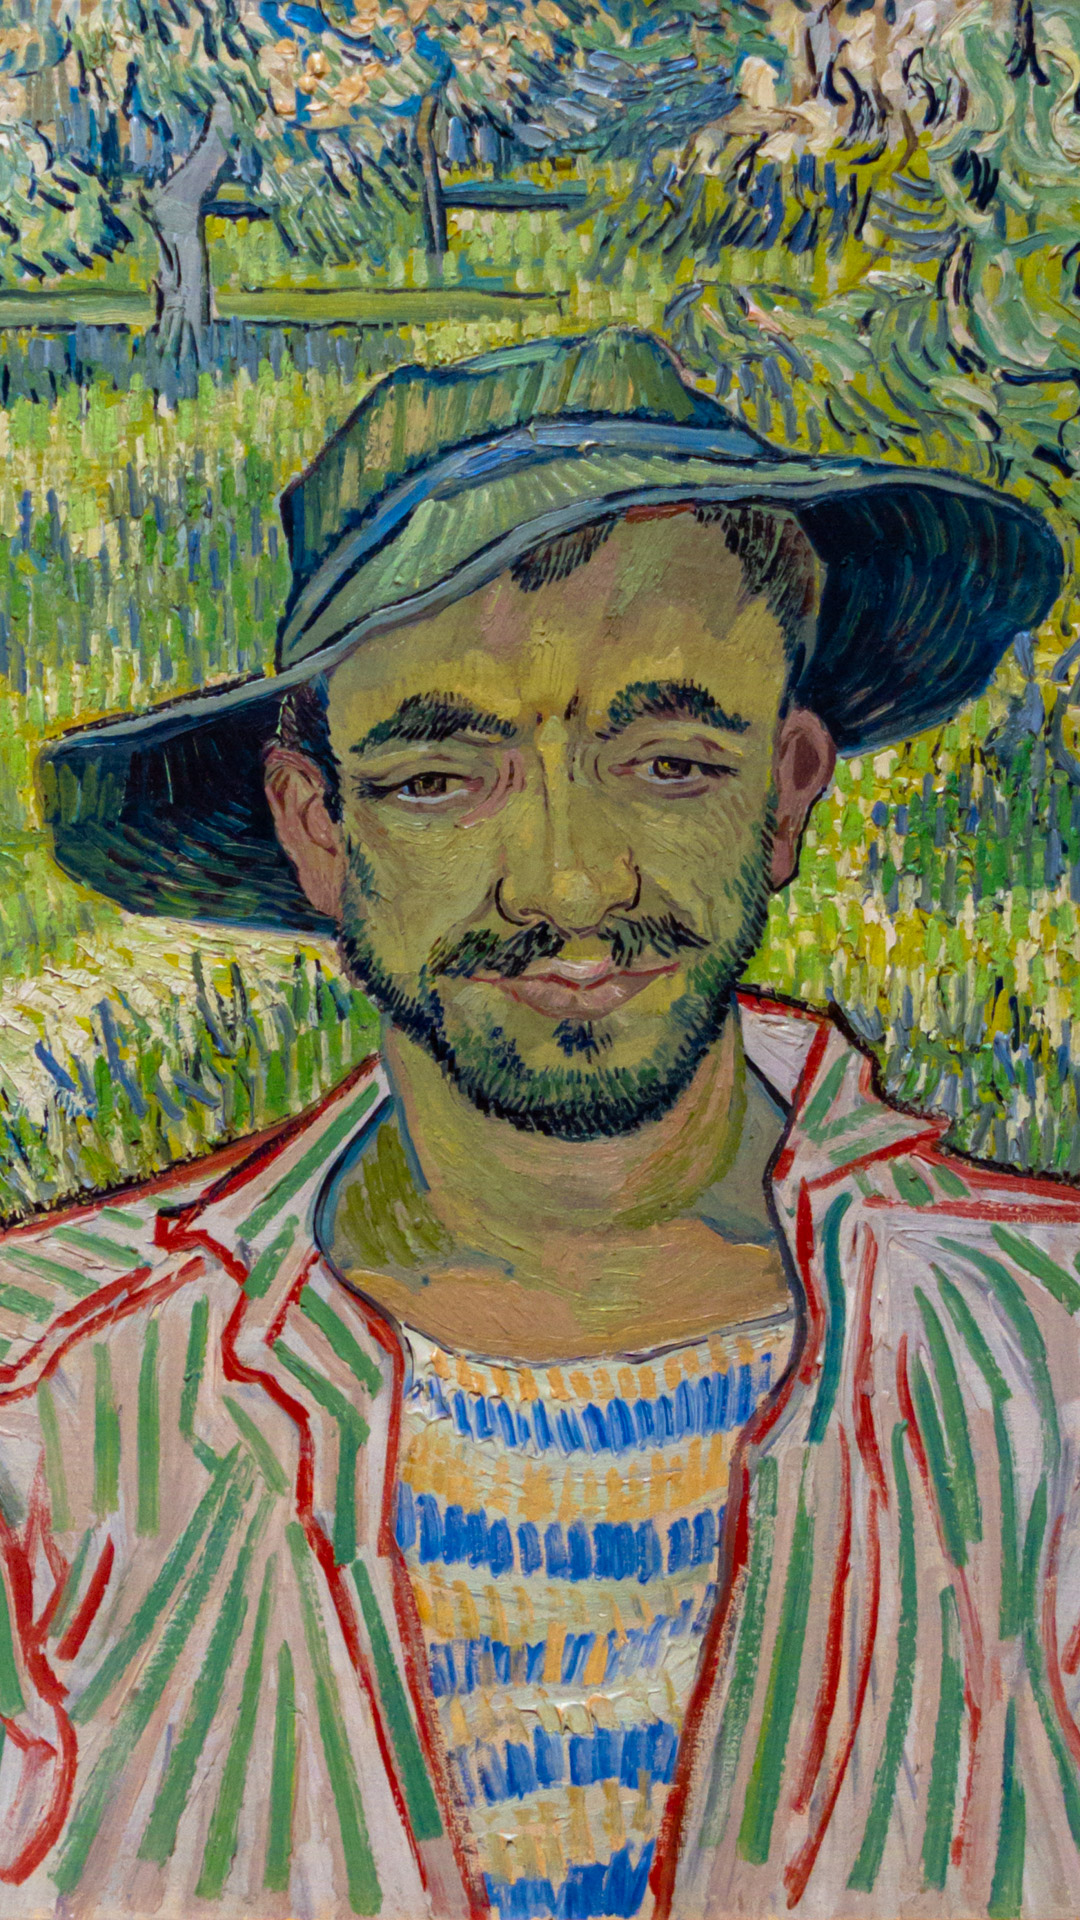 Immerse yourself in the passion and intensity of Van Gogh’s art with a painting wallpaper portraying a Young Peasant